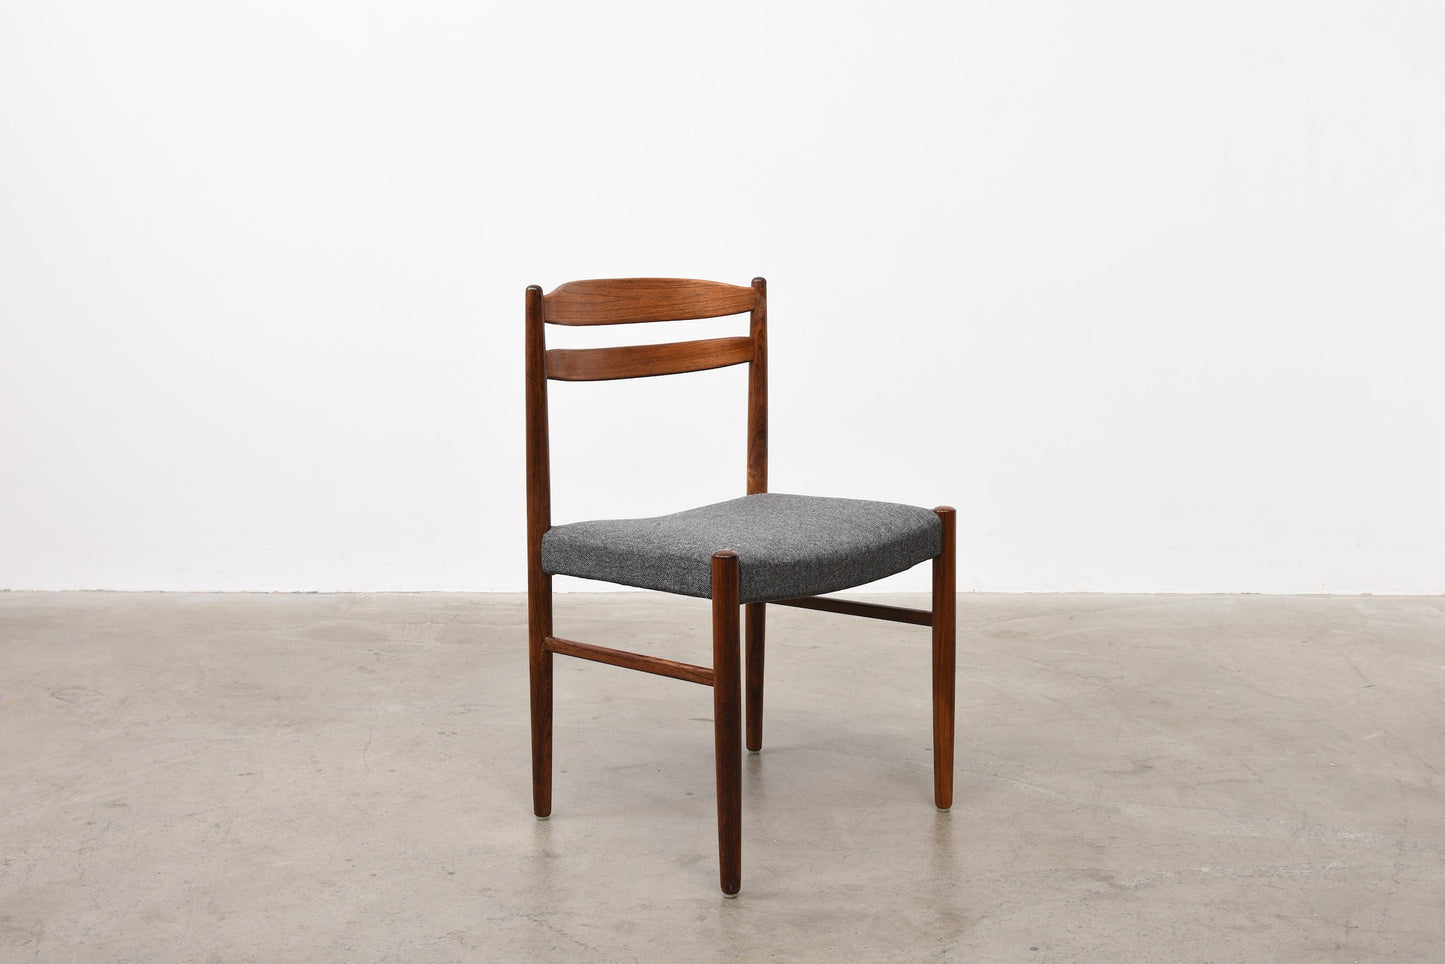 Set of rosewood chairs by Albin Johansson & Söner